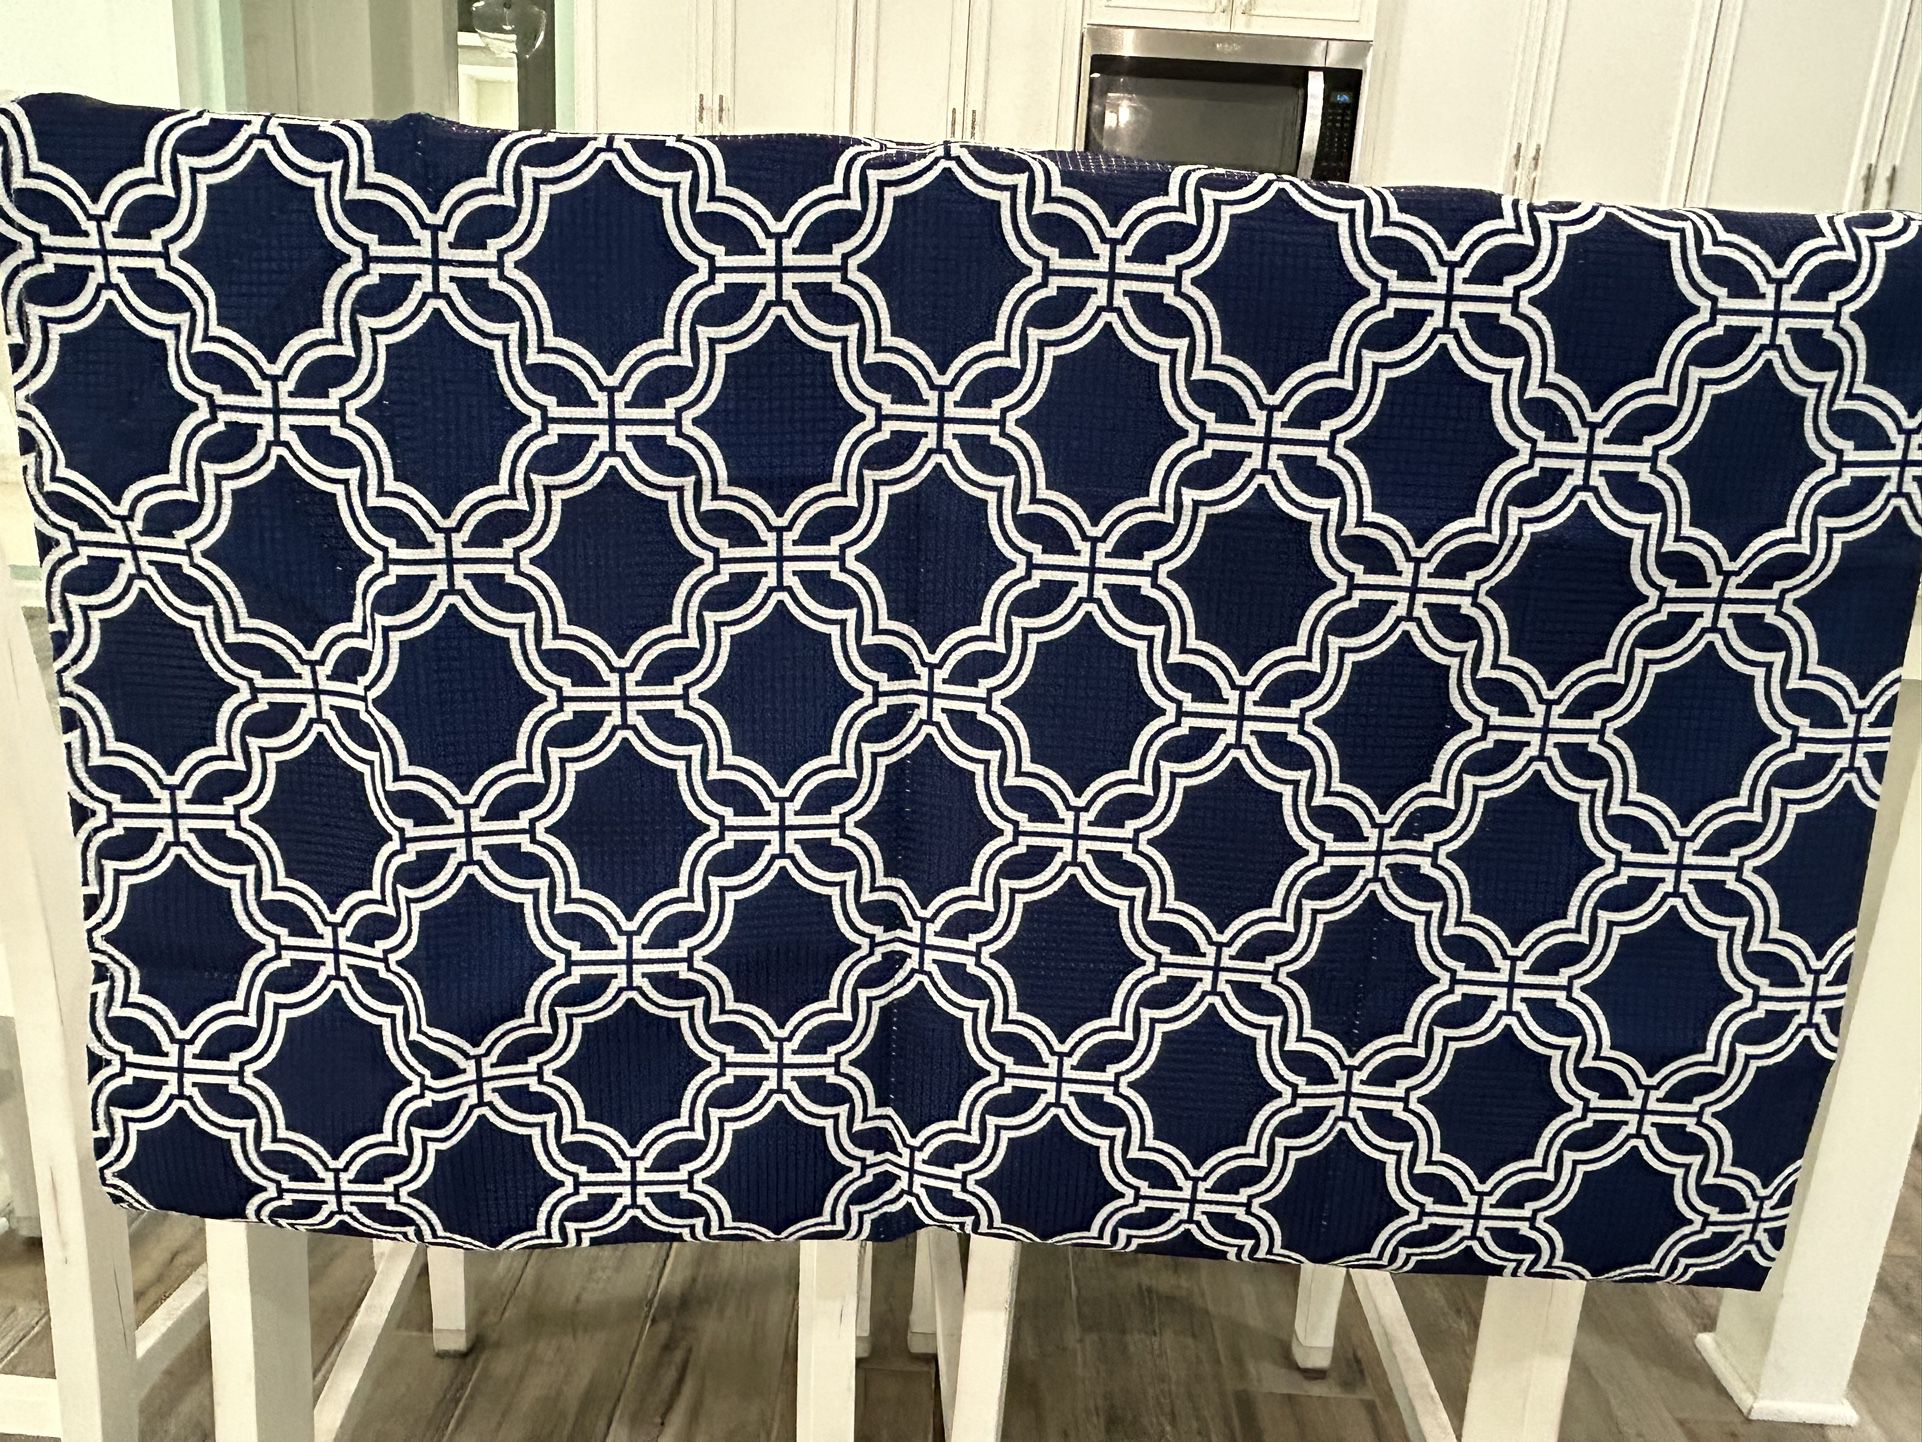 Cobalt Blue And White Shower curtain